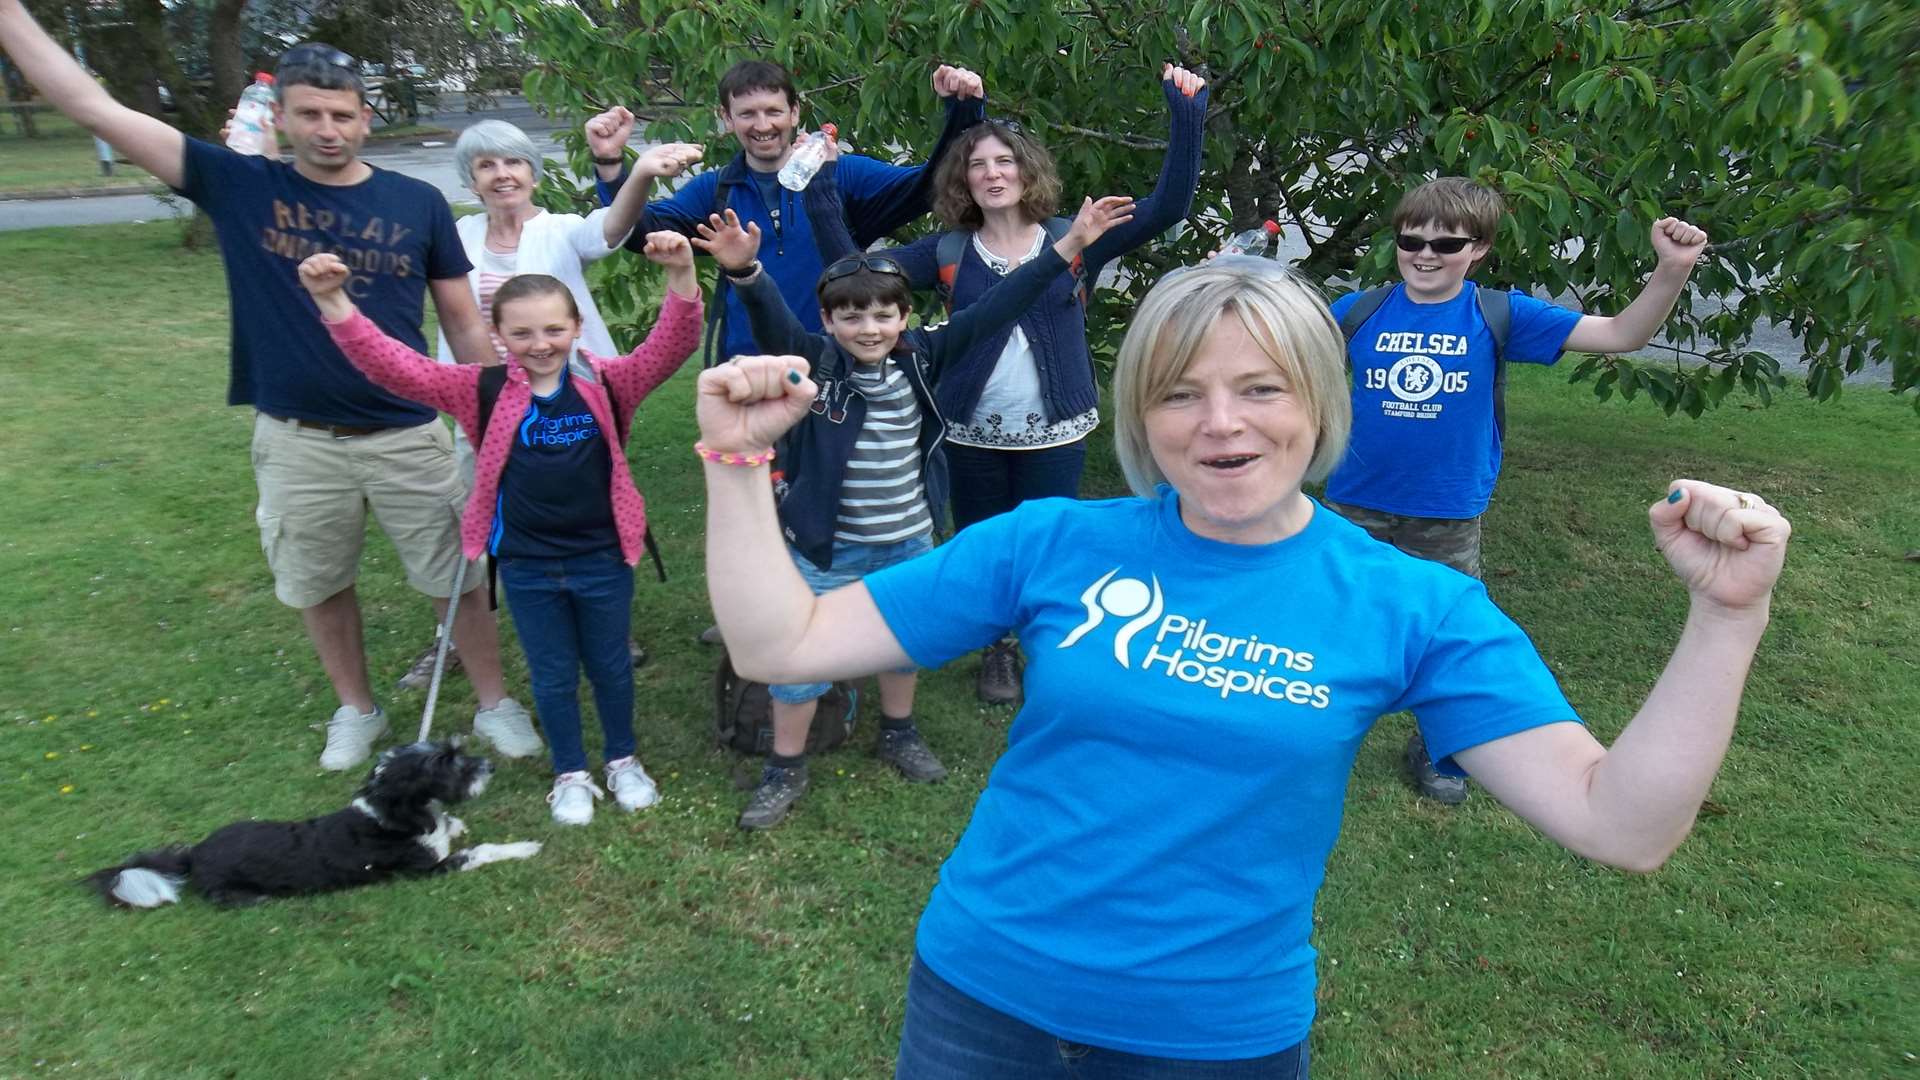 Louise Jennings and family of Tenterden taking part in the KM Charity Walk 2014 for Pilgrim's Hospice as part of a '100 miles in 100 days' challenge